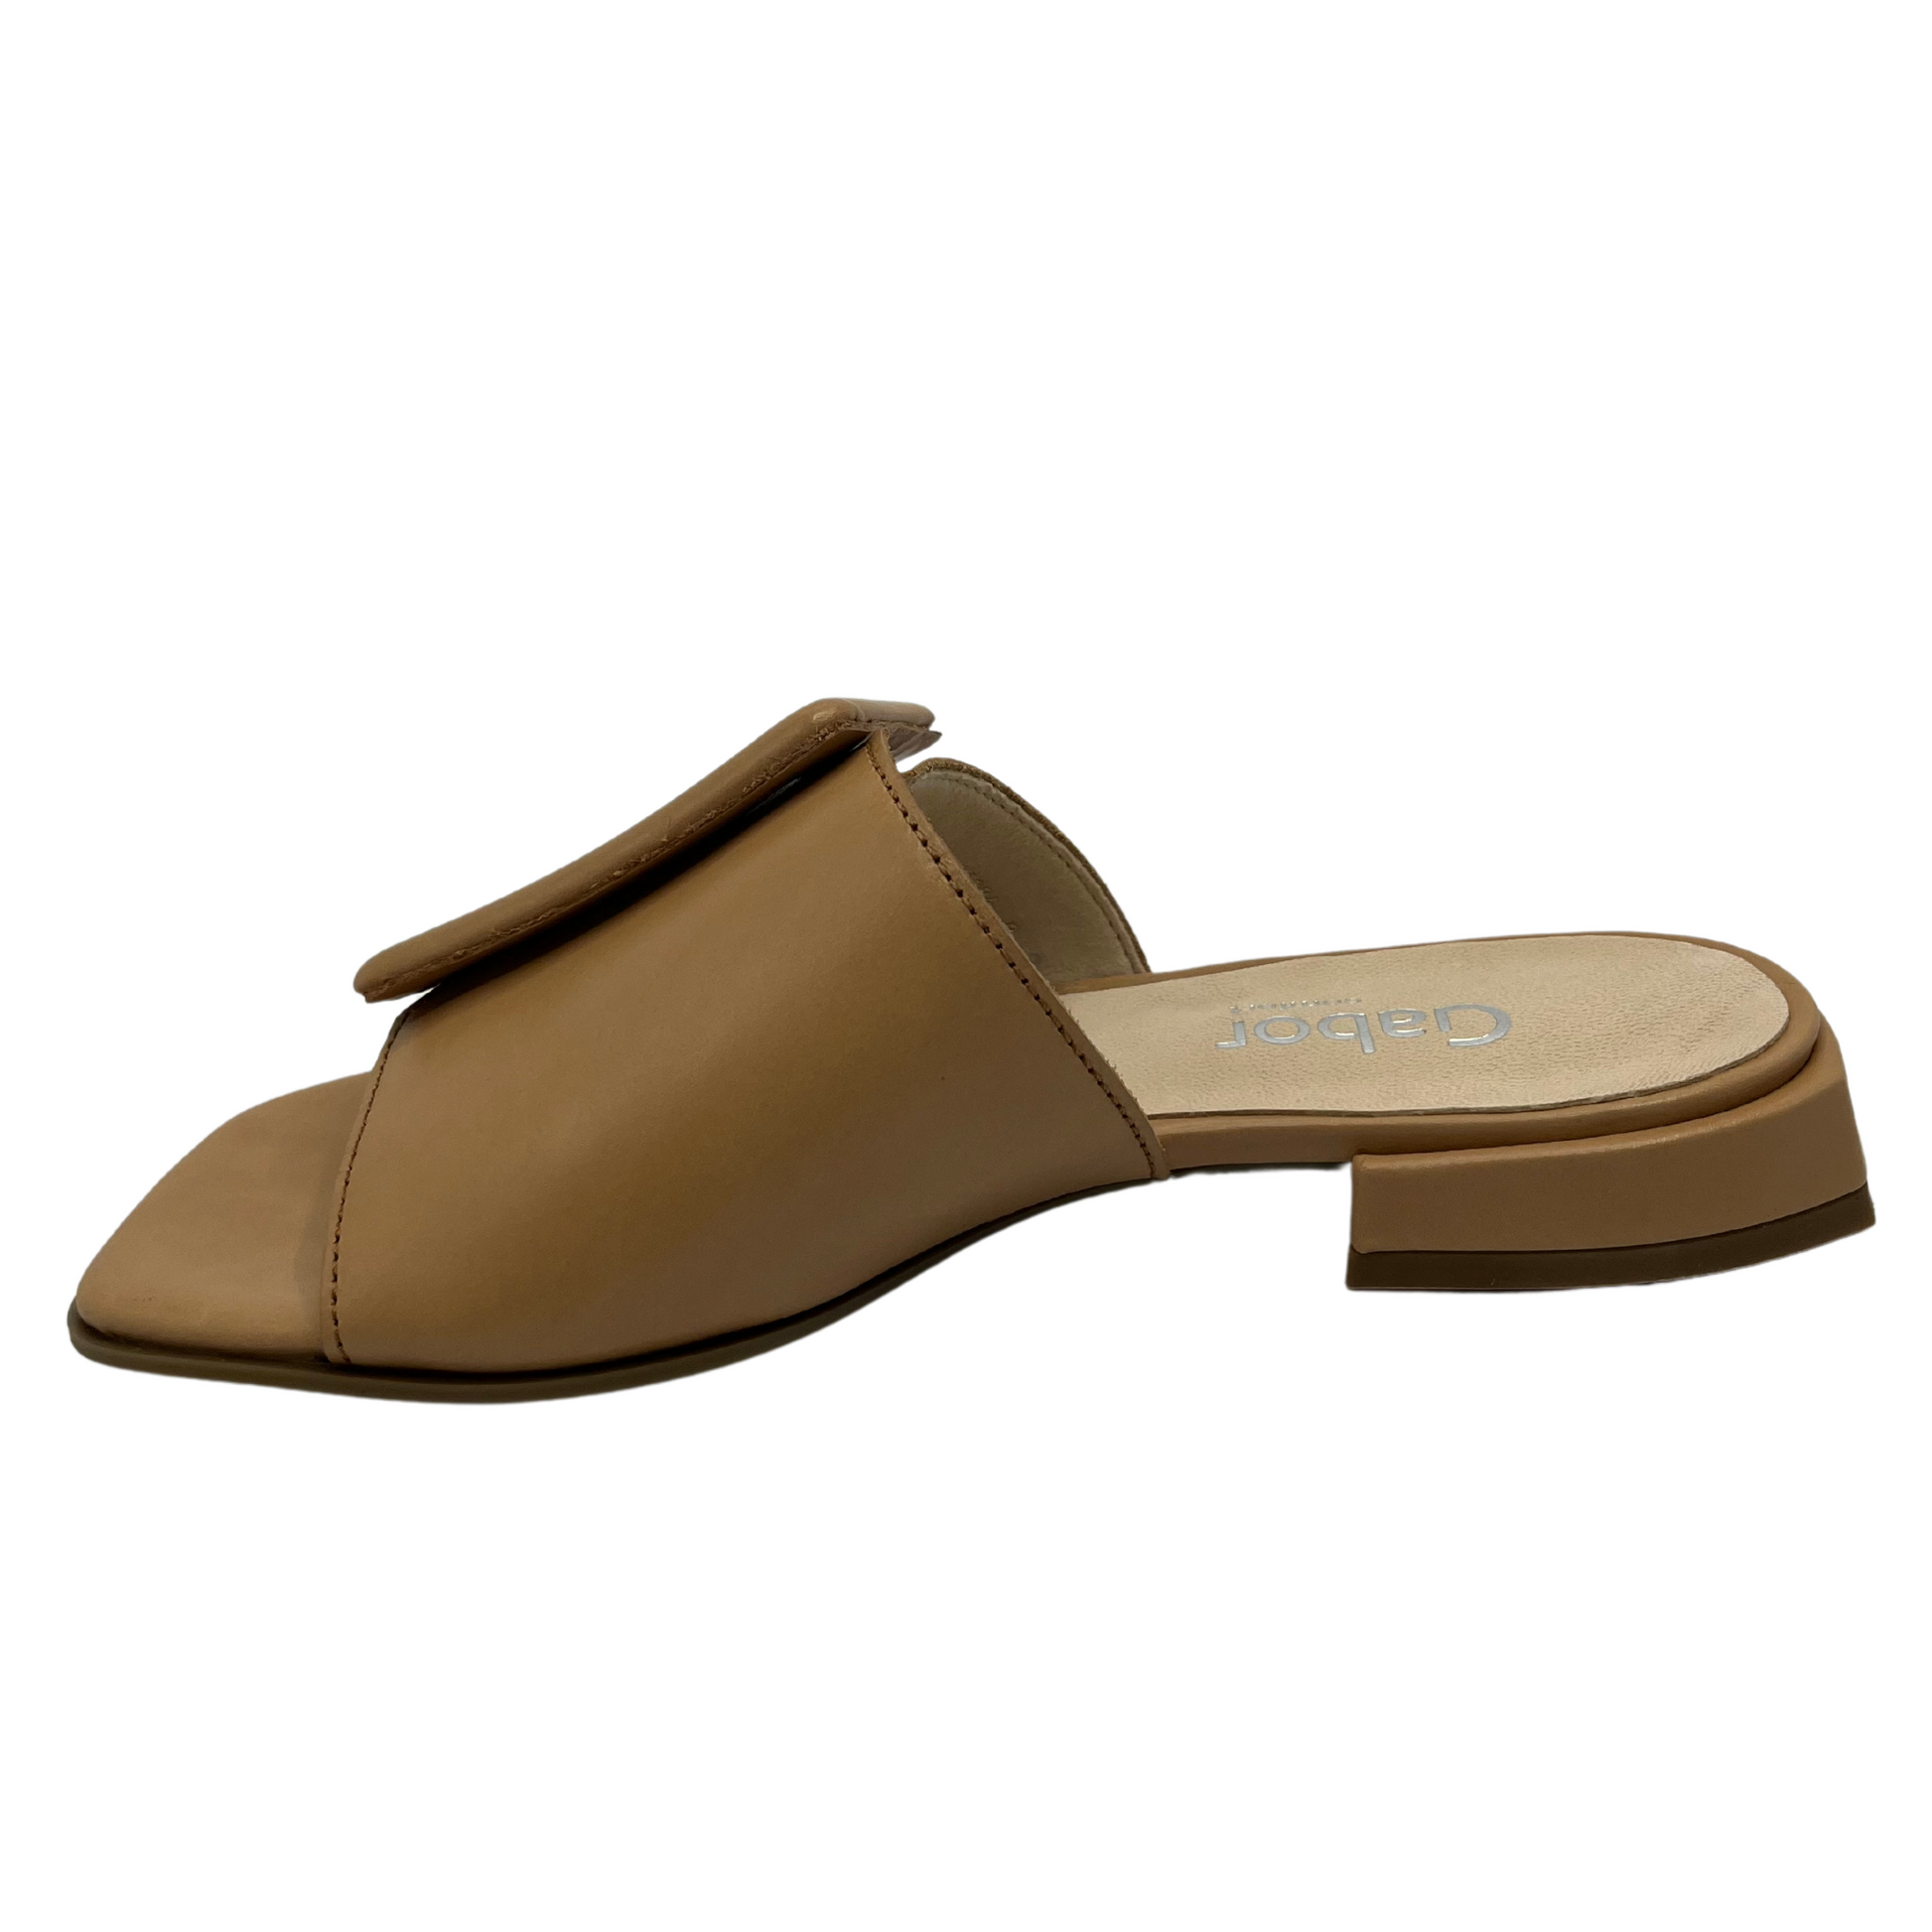 Left facing view of brown leather slip on sandals with a low wrapped heel and an oversized buckle detail on strap